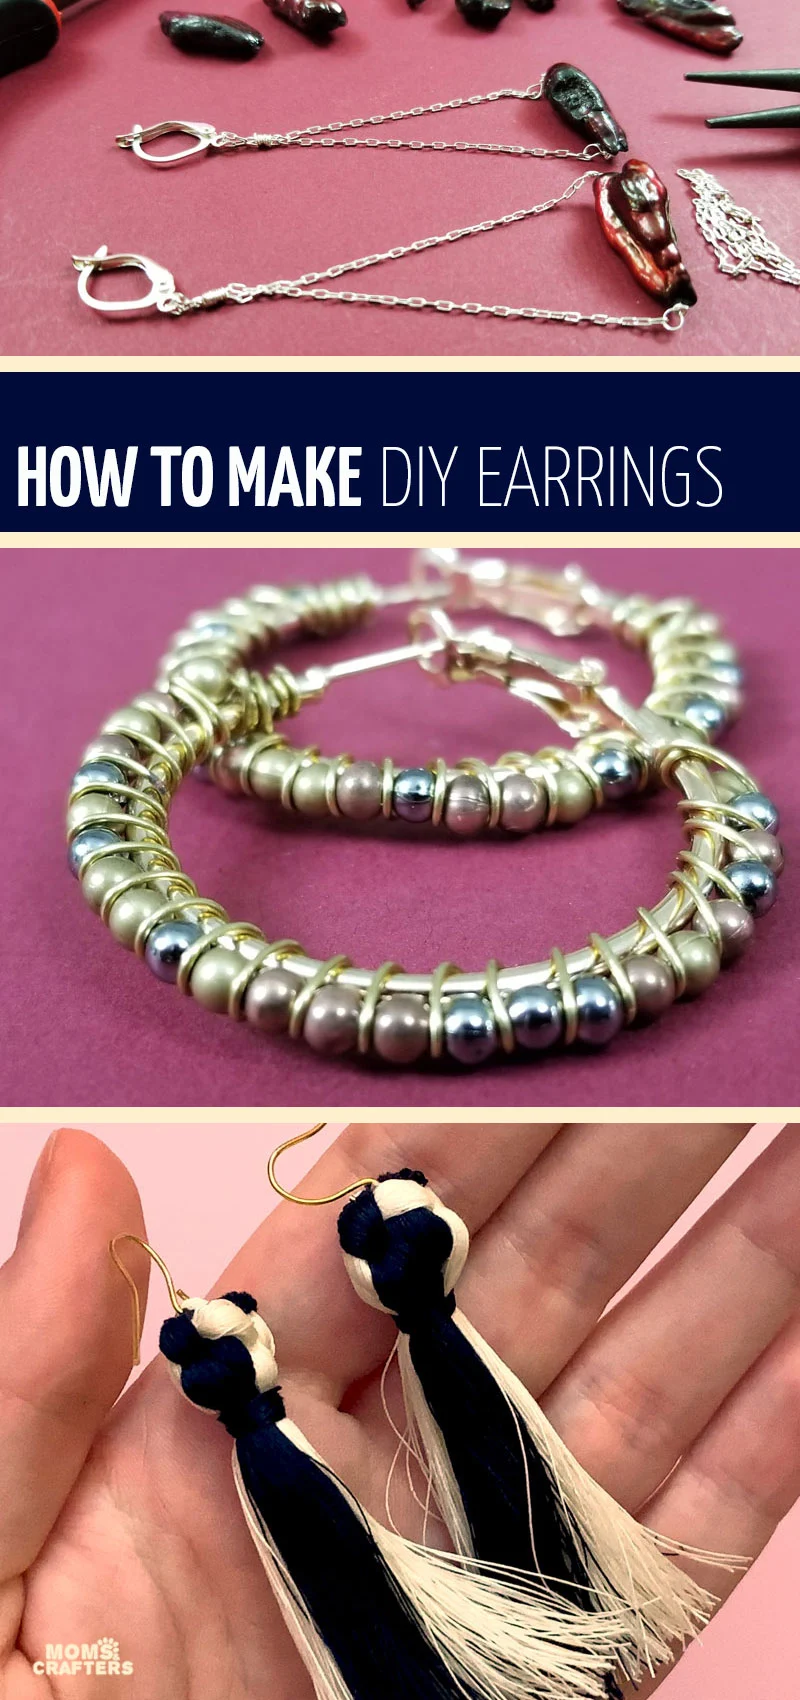 Make your own easy DIY earrings with these simple tutorials for teens and adults! These jewelry making basics include wire wrapped hoops, DIY stud earrings, tassel earrings, beaded ones too! You'll find so many ideas with beads, dangle, and even some for teens!